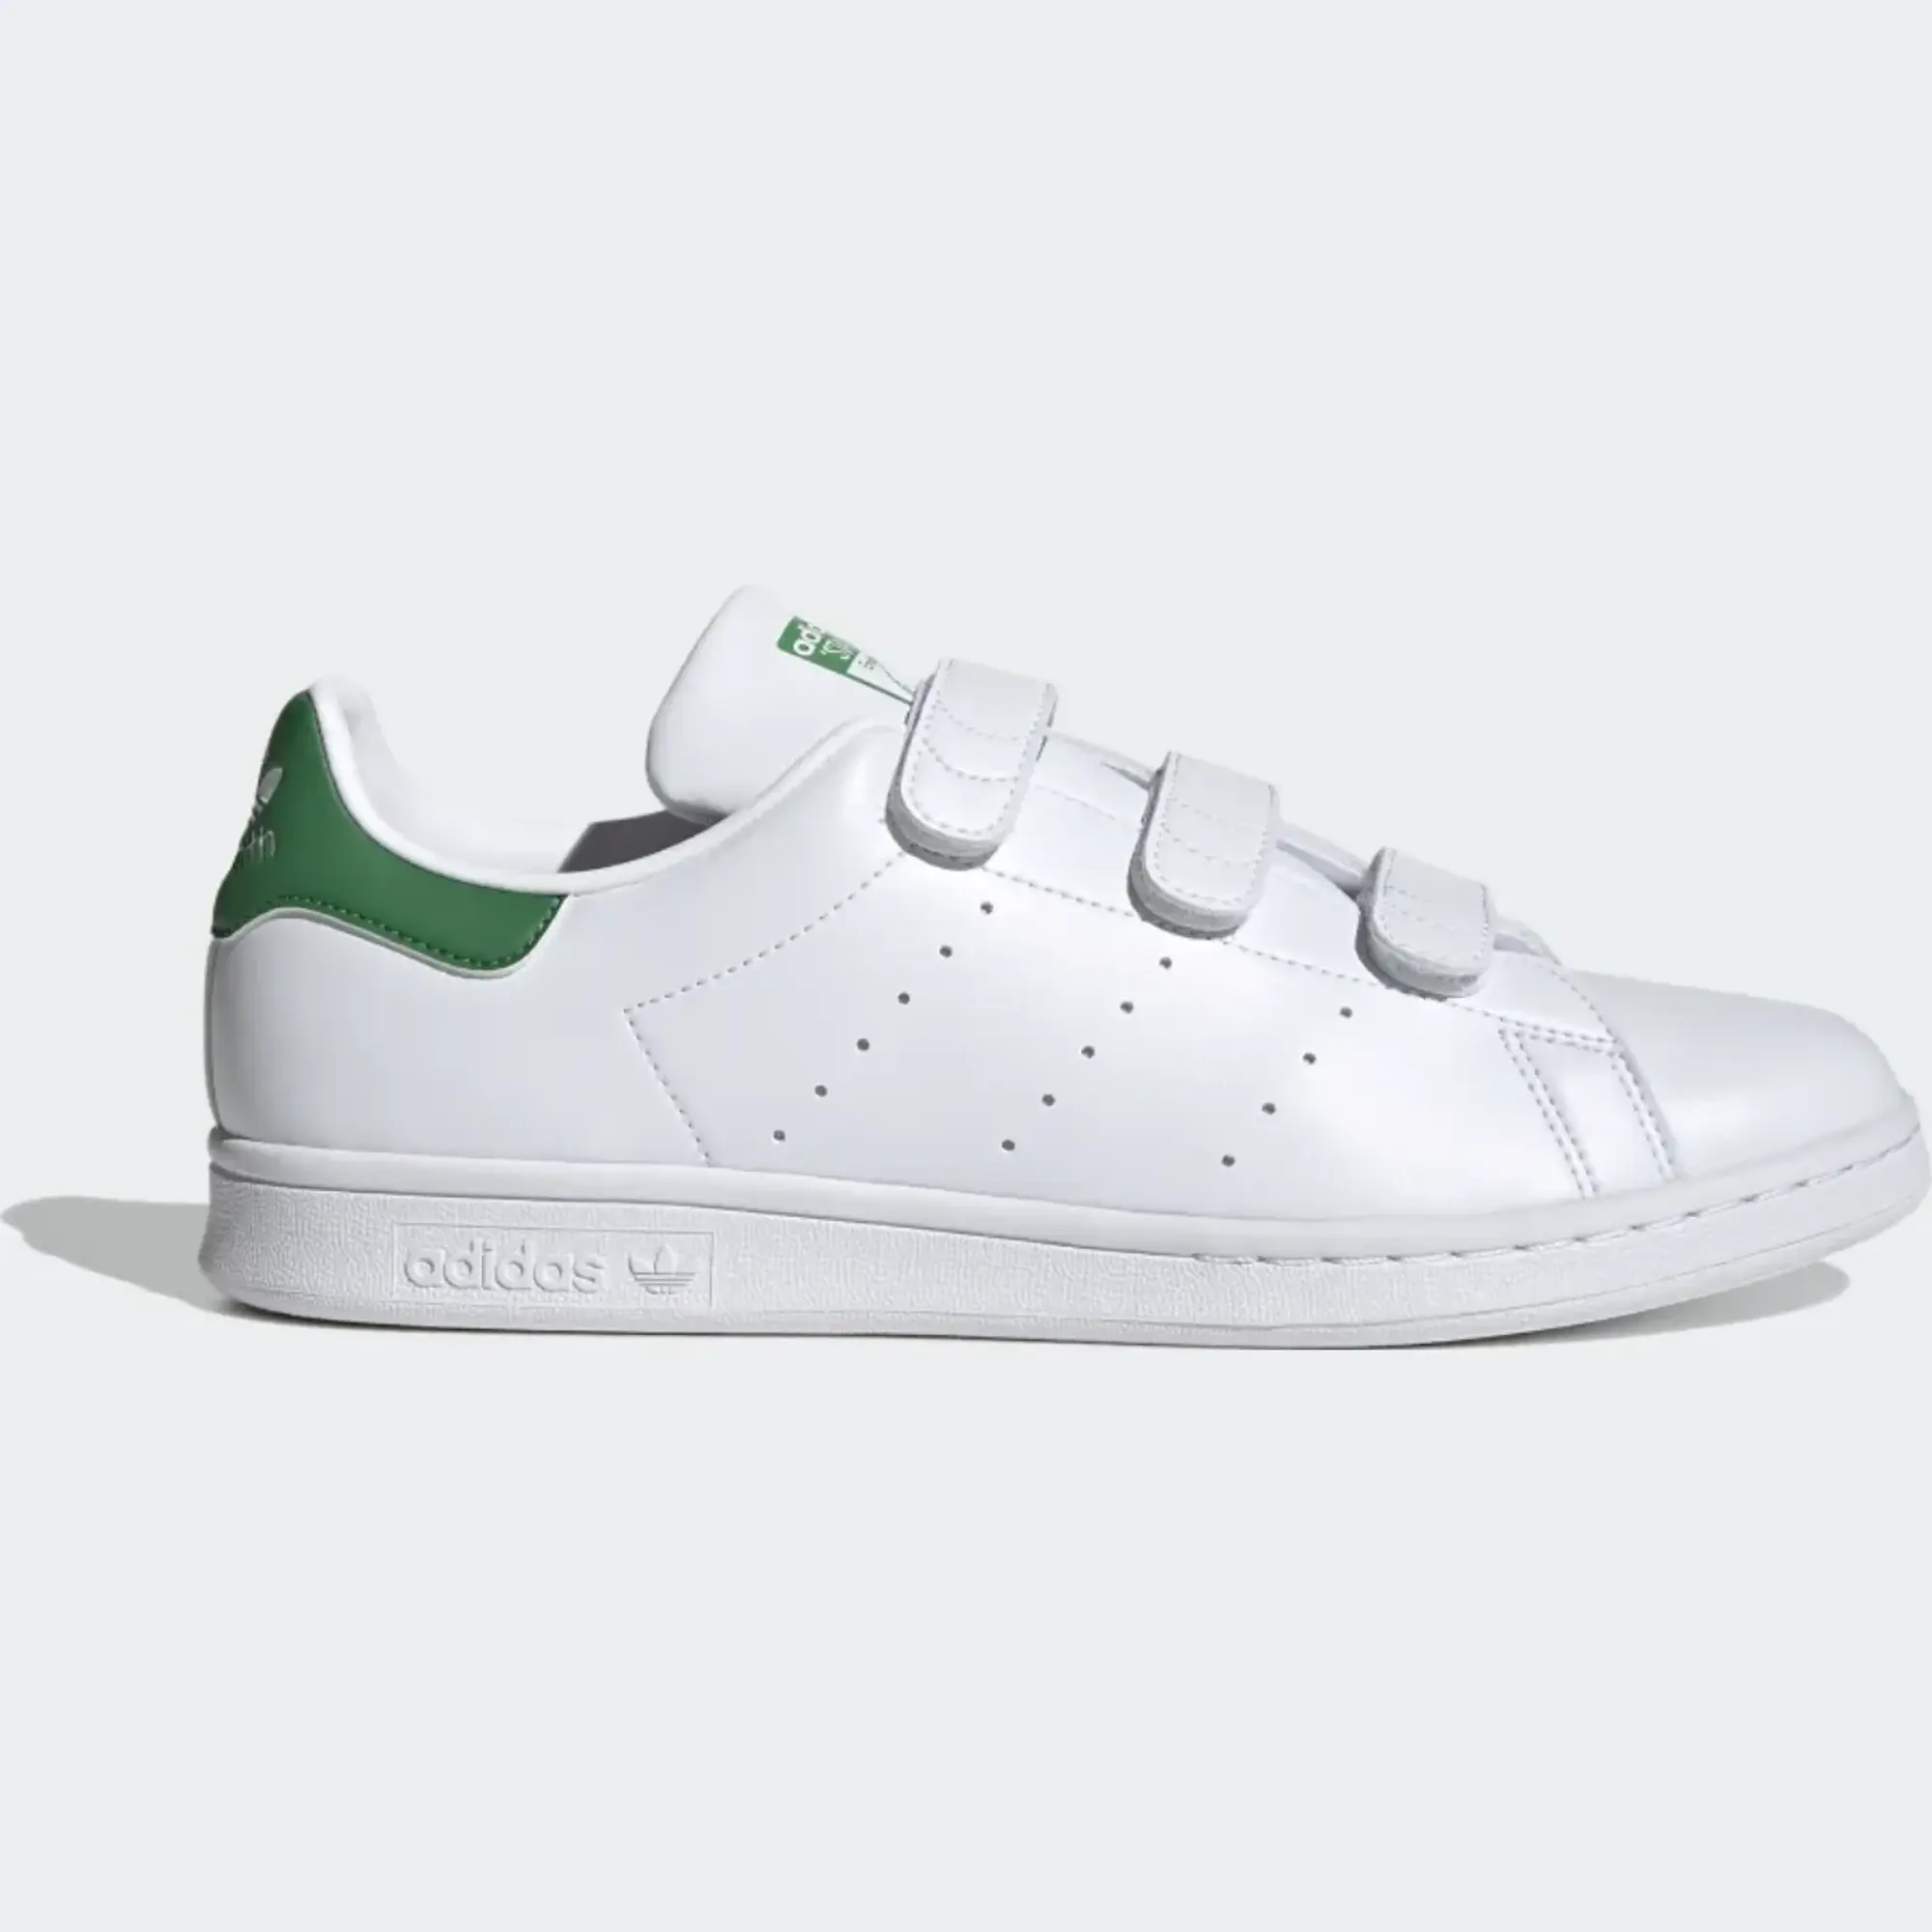 Adidas Originals Strap Stan Smith Trainers In White And Green - White